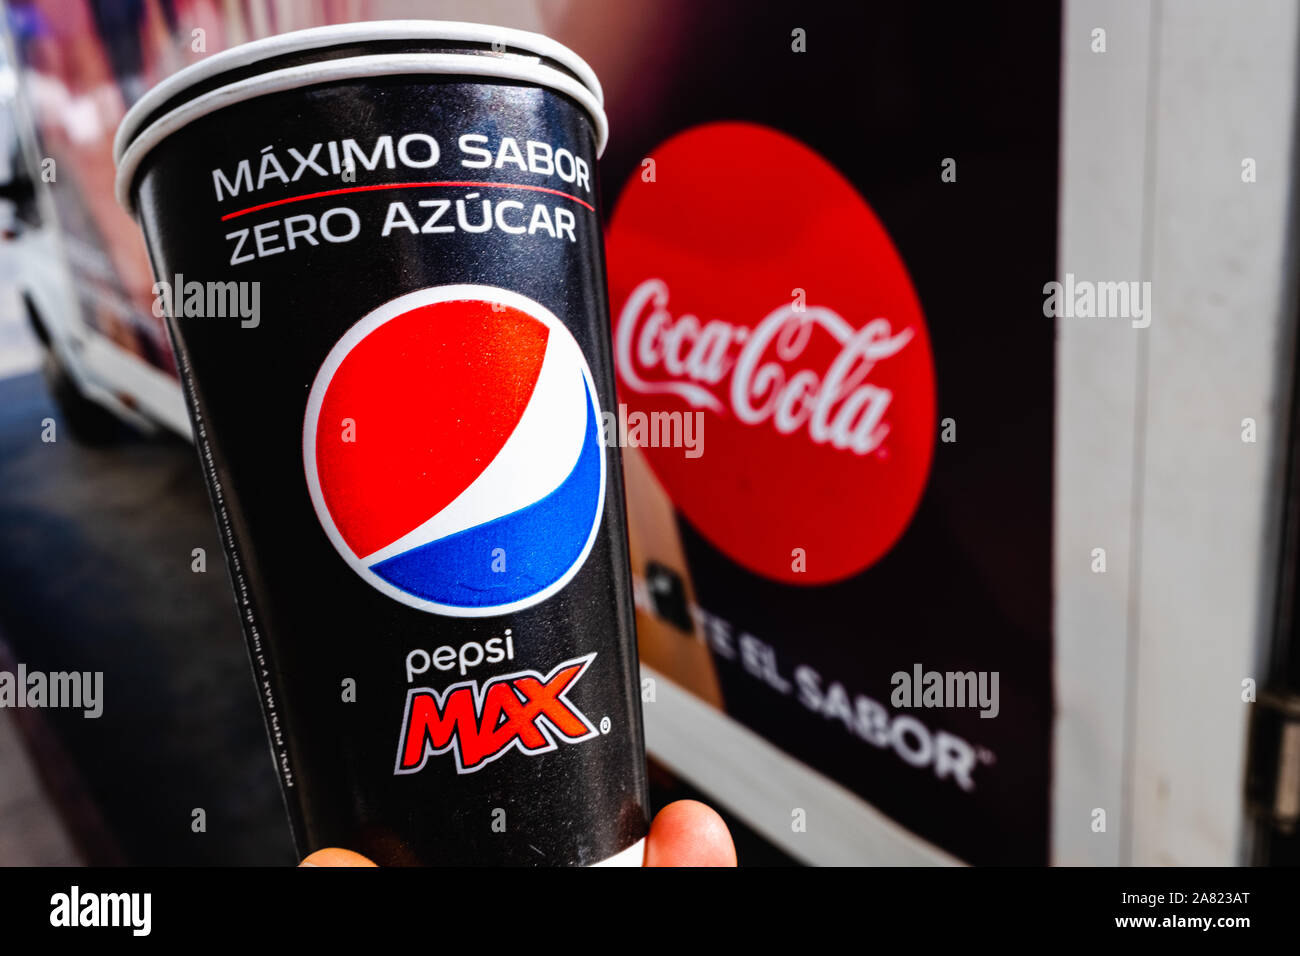 Coca cola paper cup Cut Out Stock Images & Pictures - Alamy